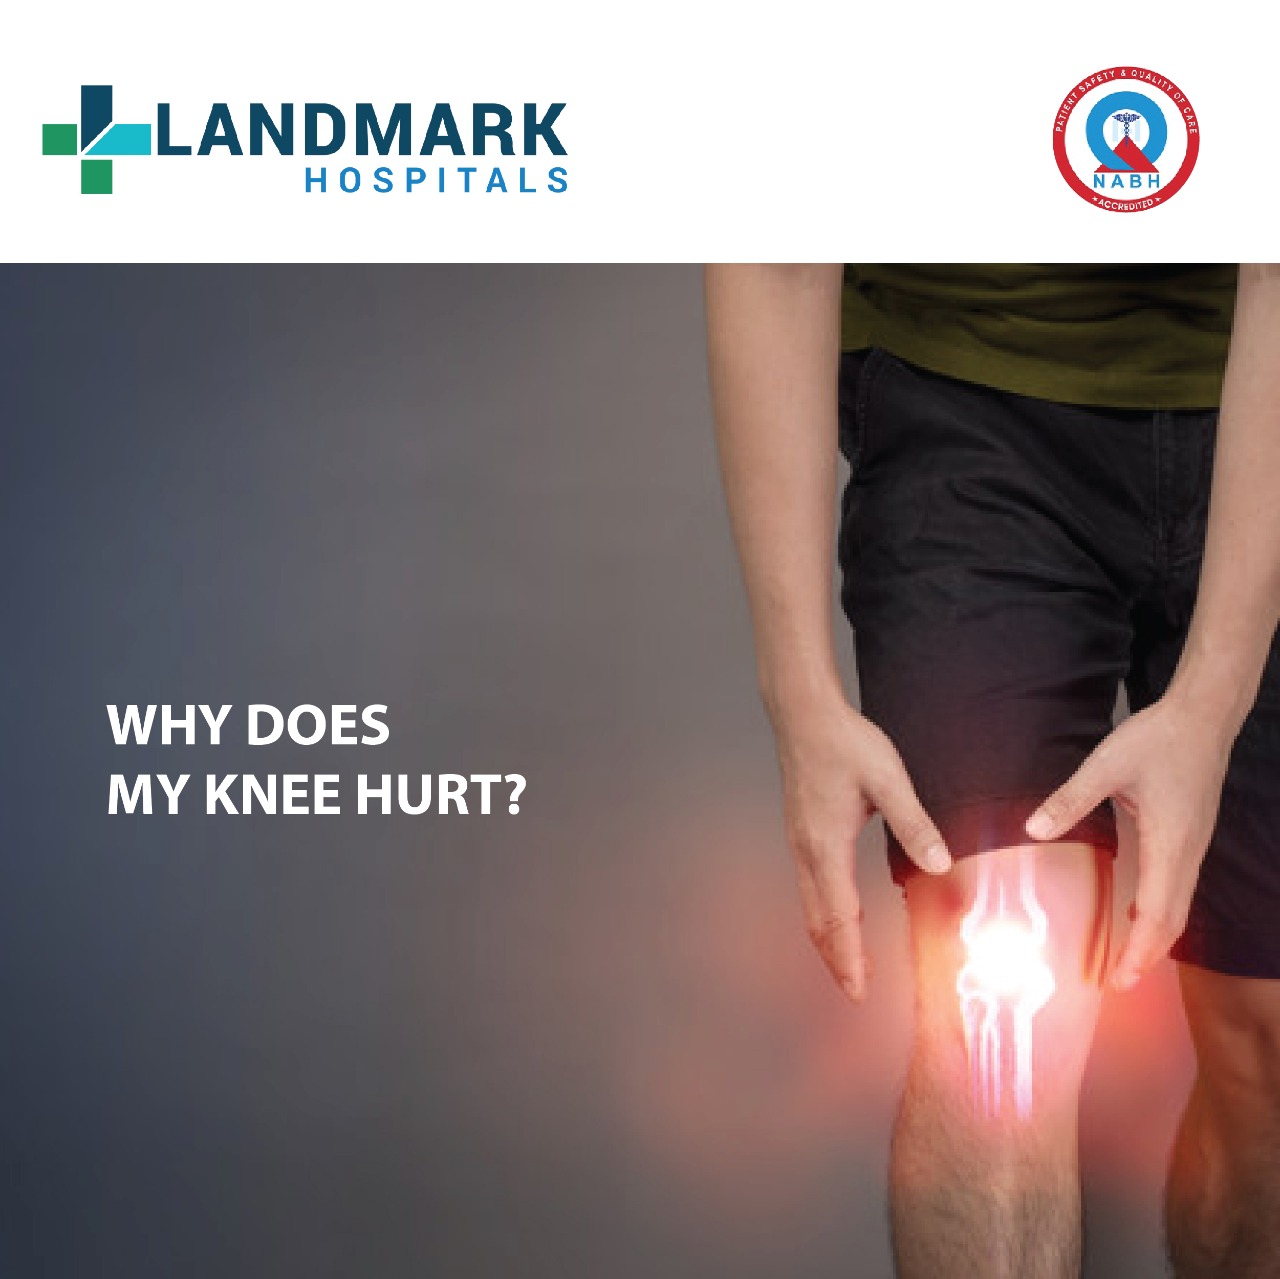 Why does my knee hurt?